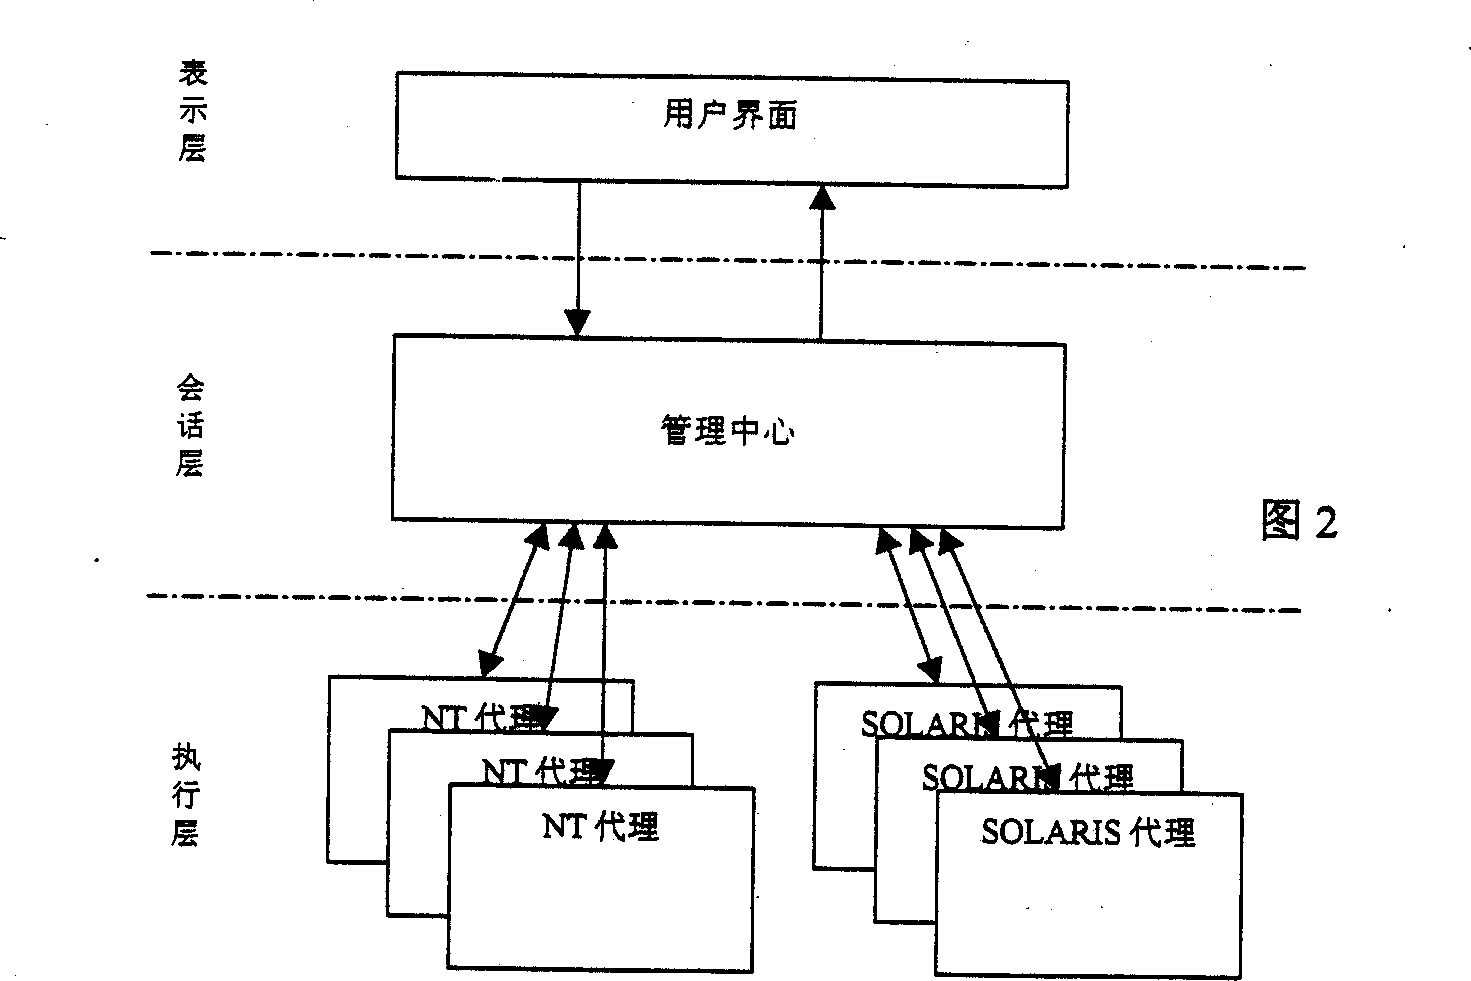 Distributed type emergency reaction control system